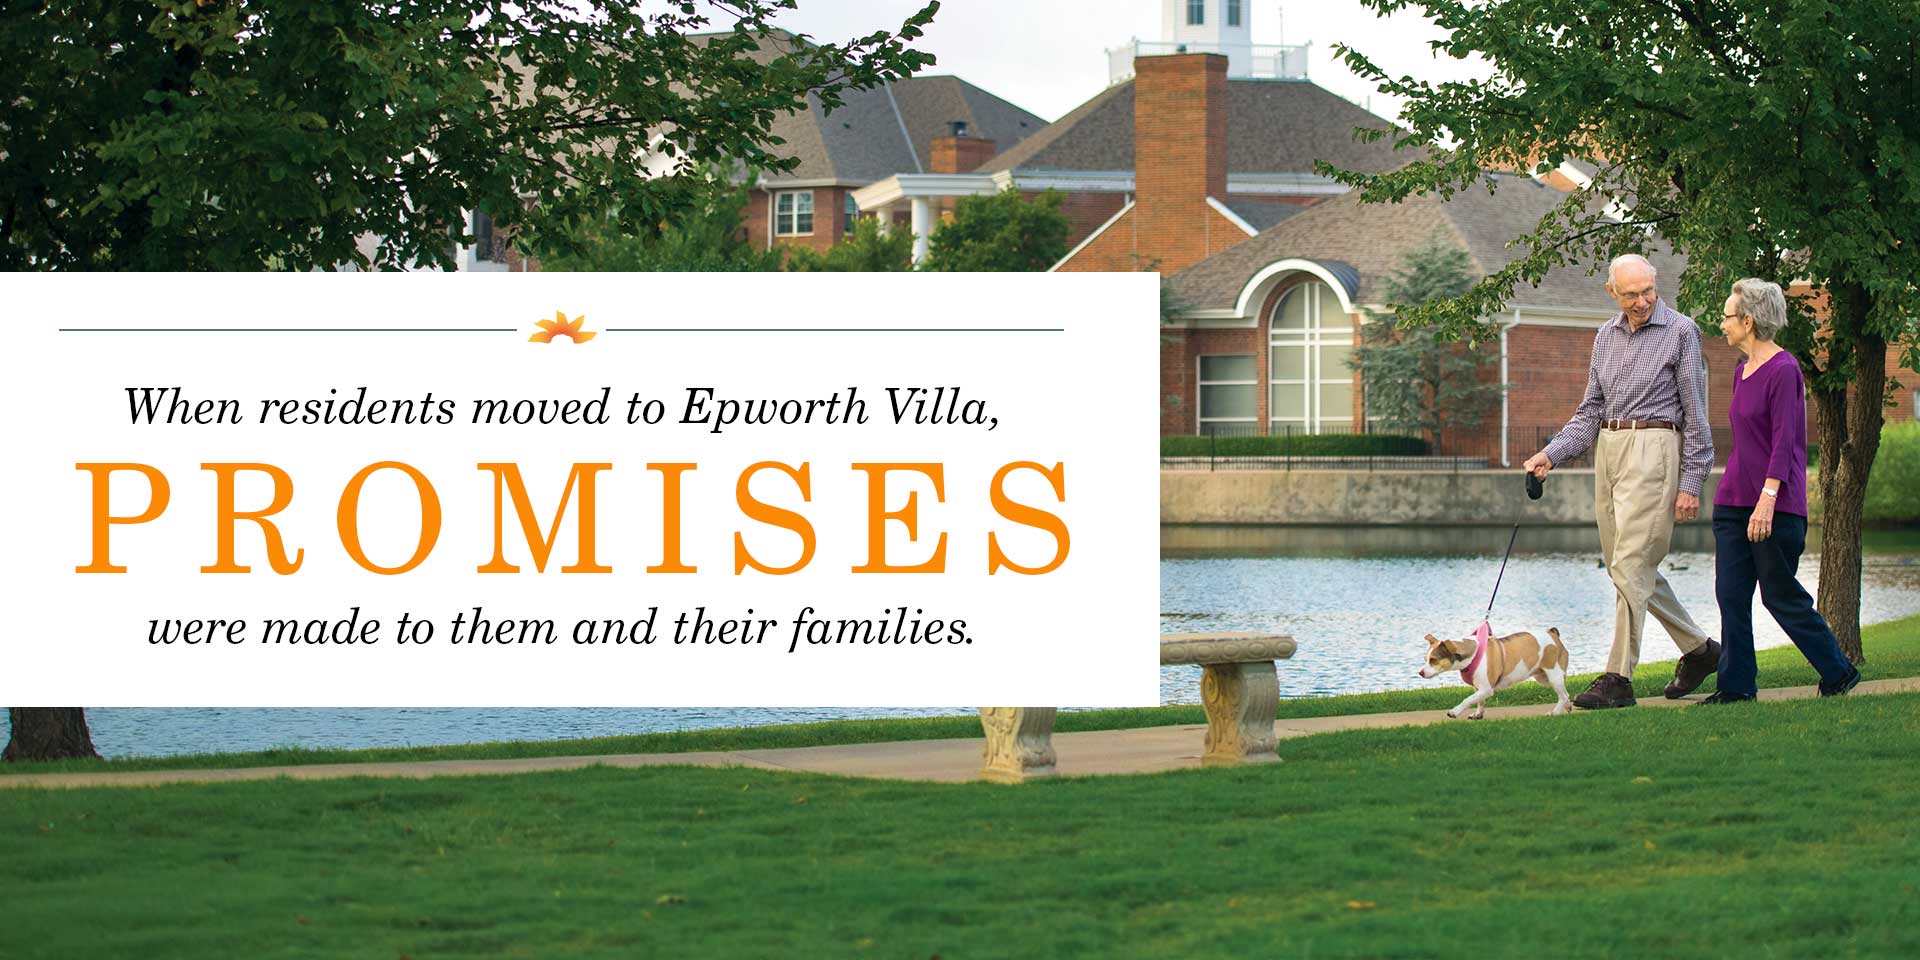 Promises were made to Epworth Villa residents